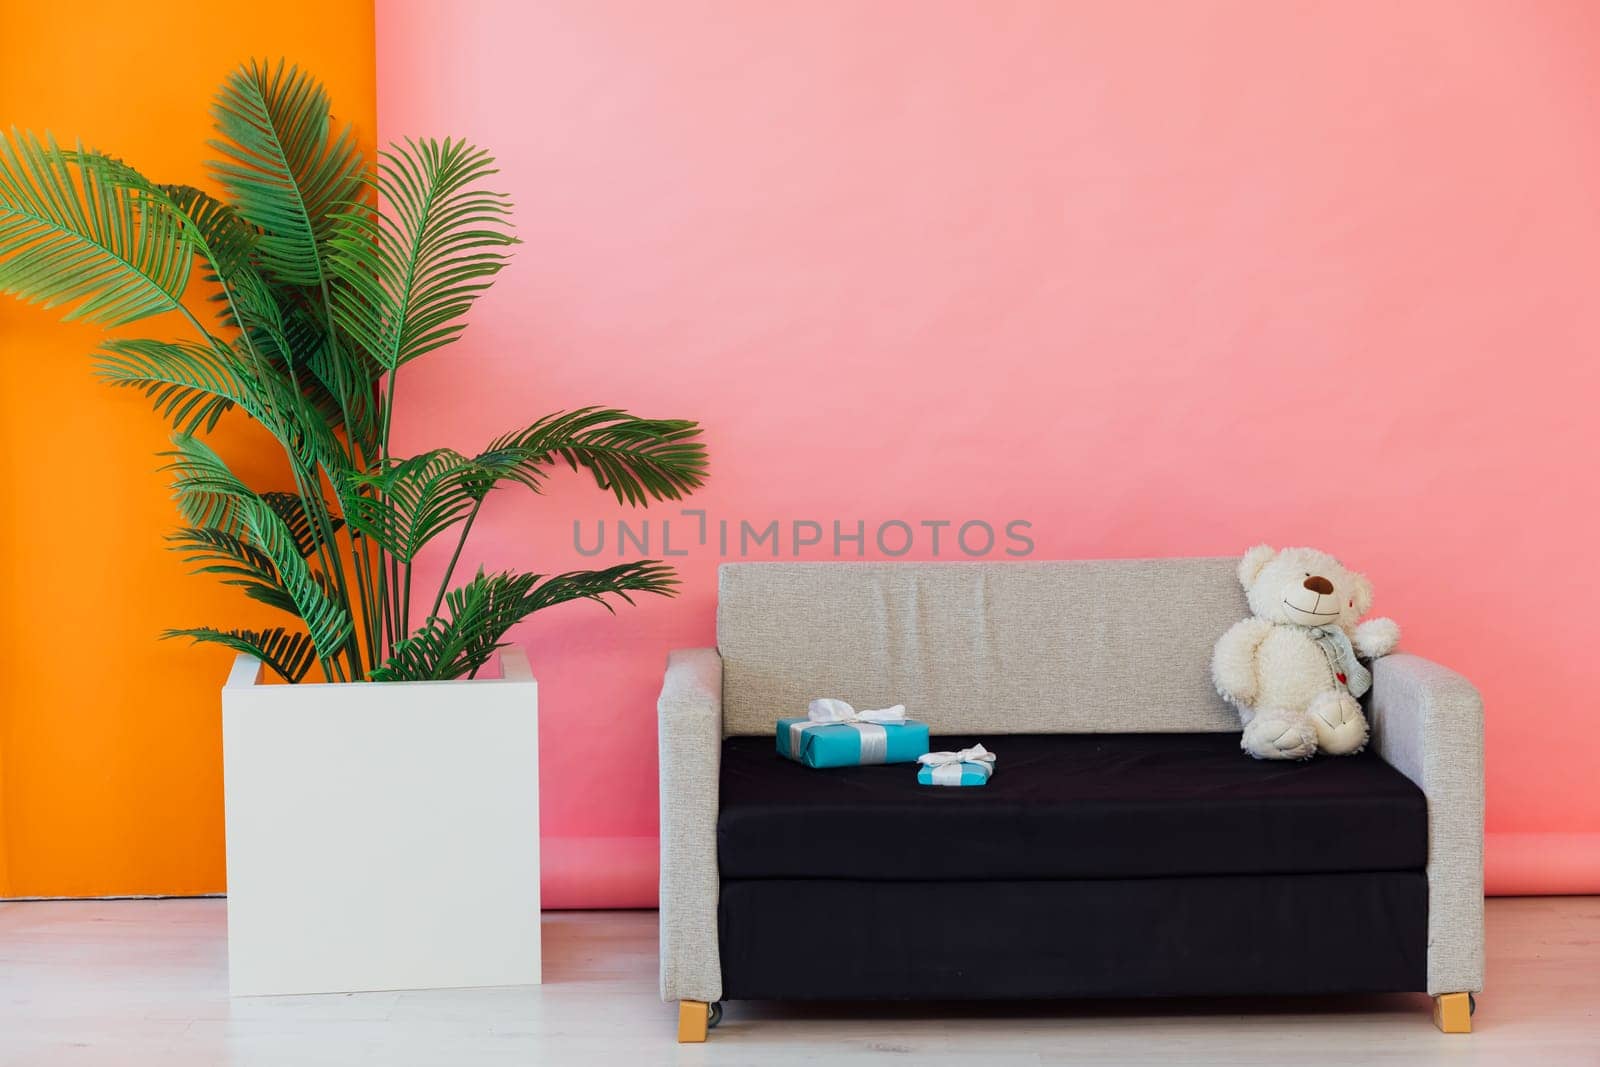 Black and grey sofa in the interior of a multicolored room